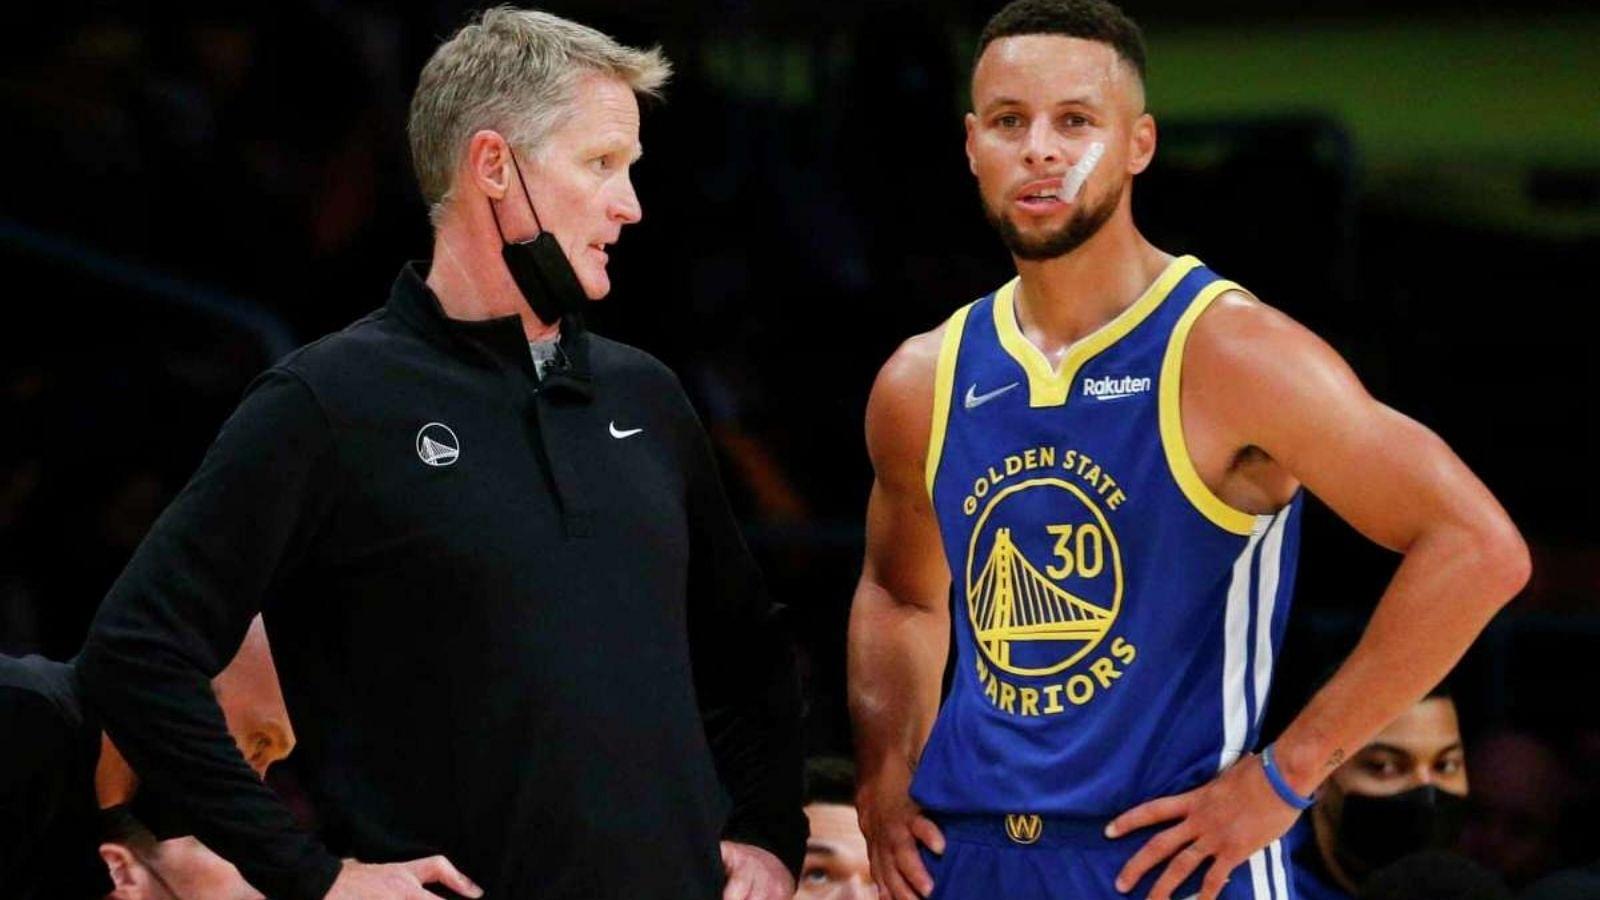 "Whenever I'm done coaching, I'll look back and thank Stephen Curry!": Steve Kerr reacts to Warriors star's Game 4 performance, praises his greatness